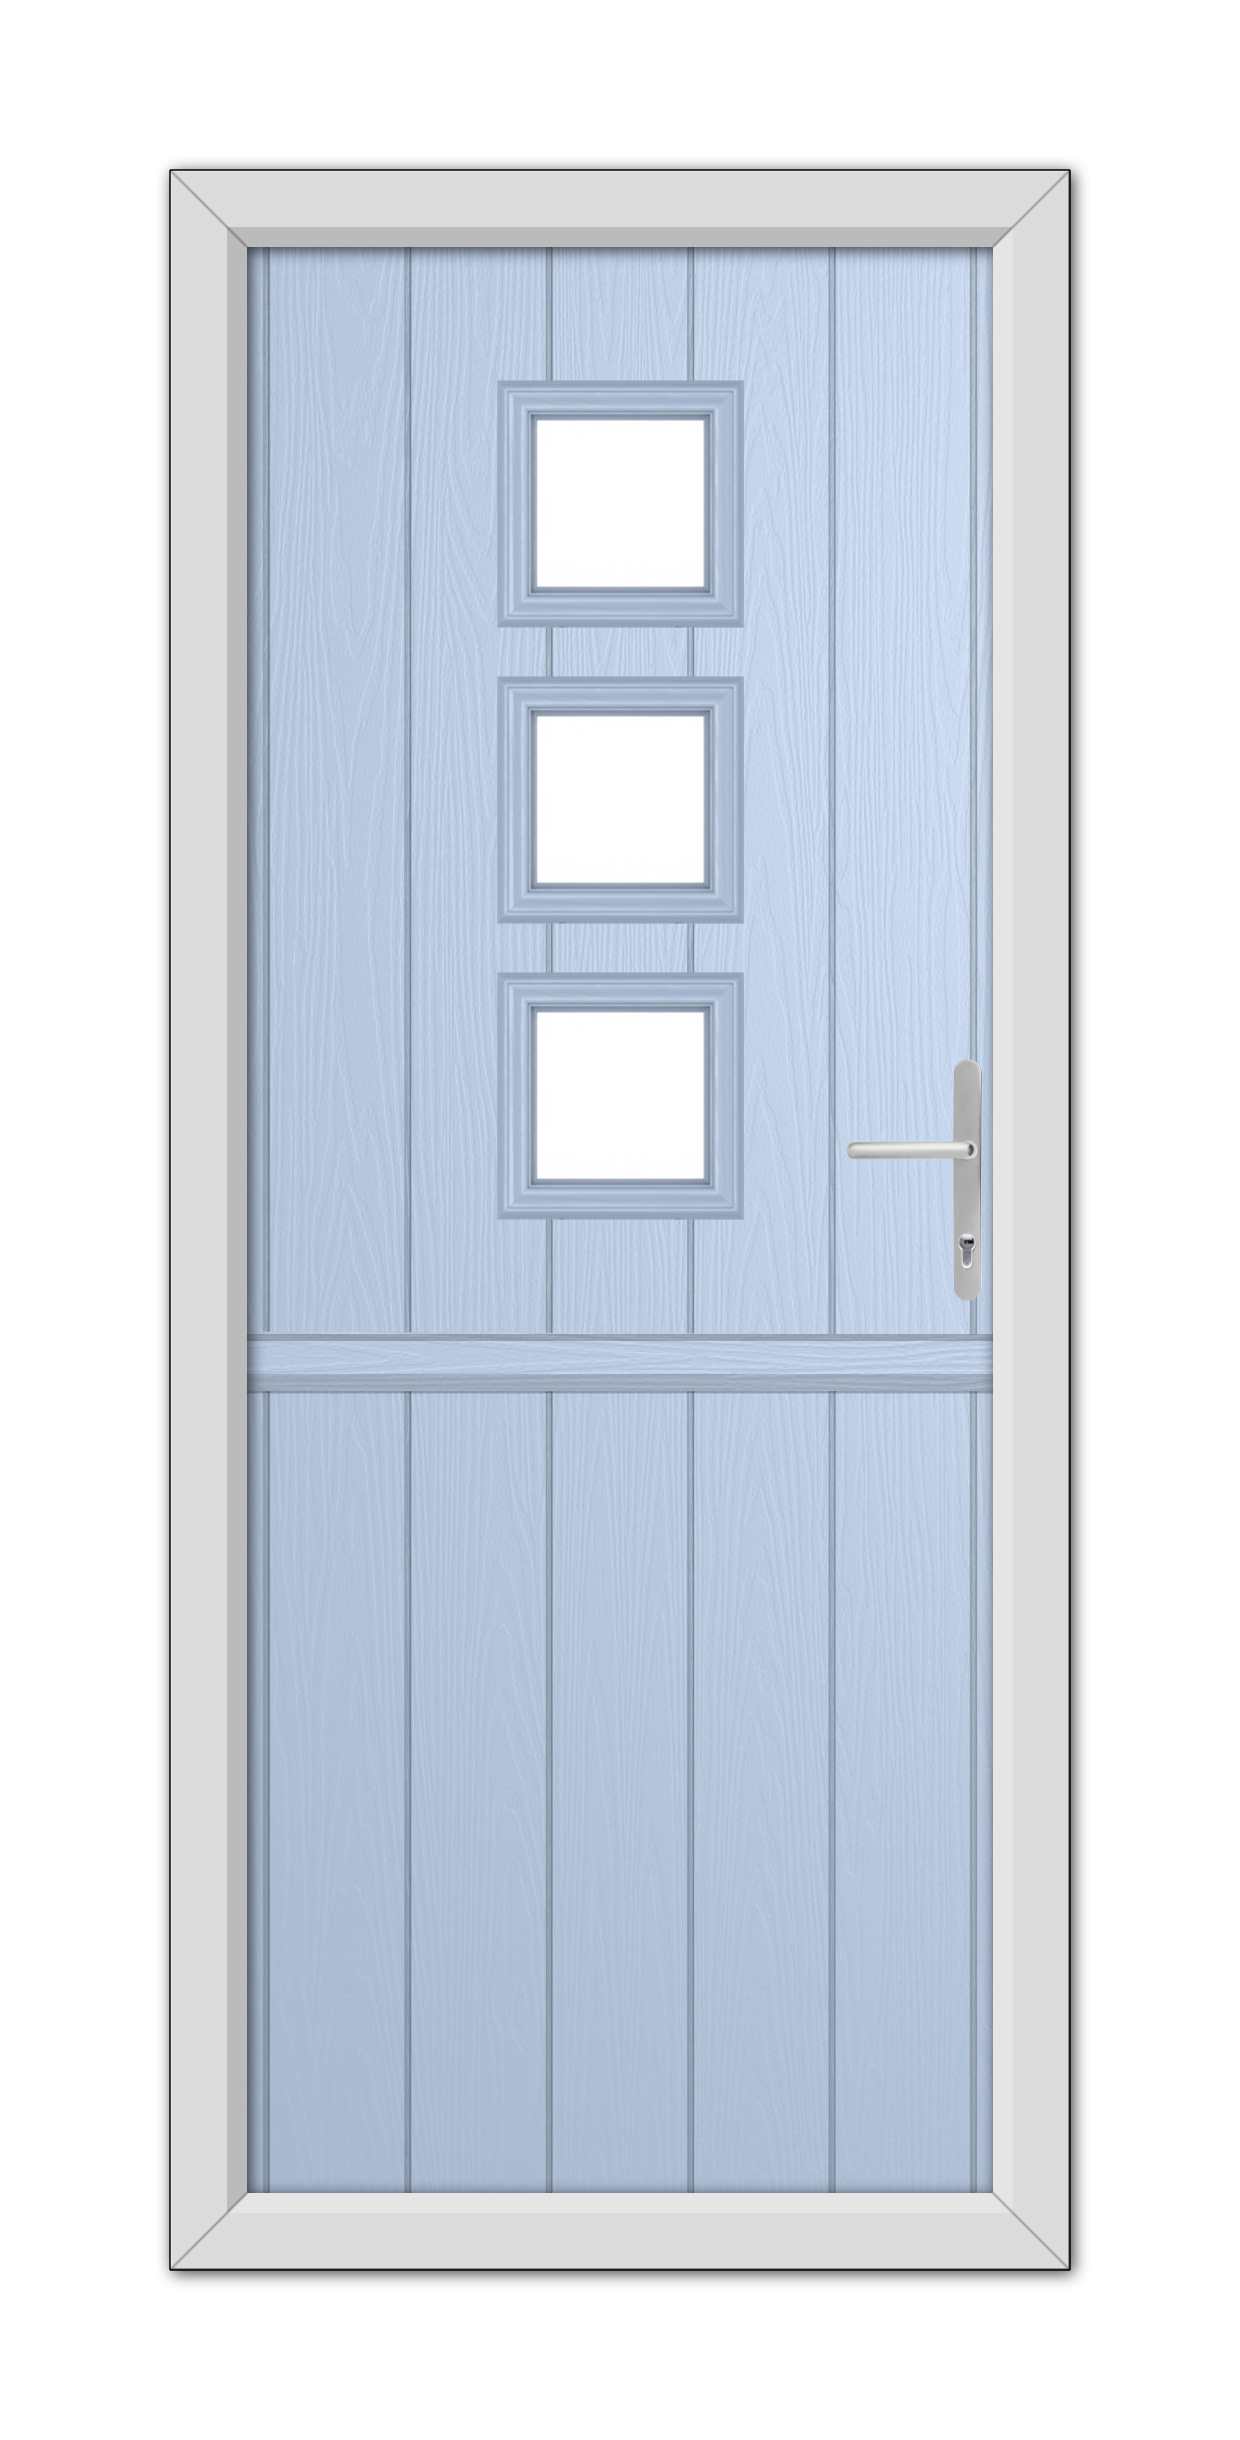 A Duck Egg Blue Montrose Stable Composite Door featuring three square windows and a metal handle, set within a white frame.